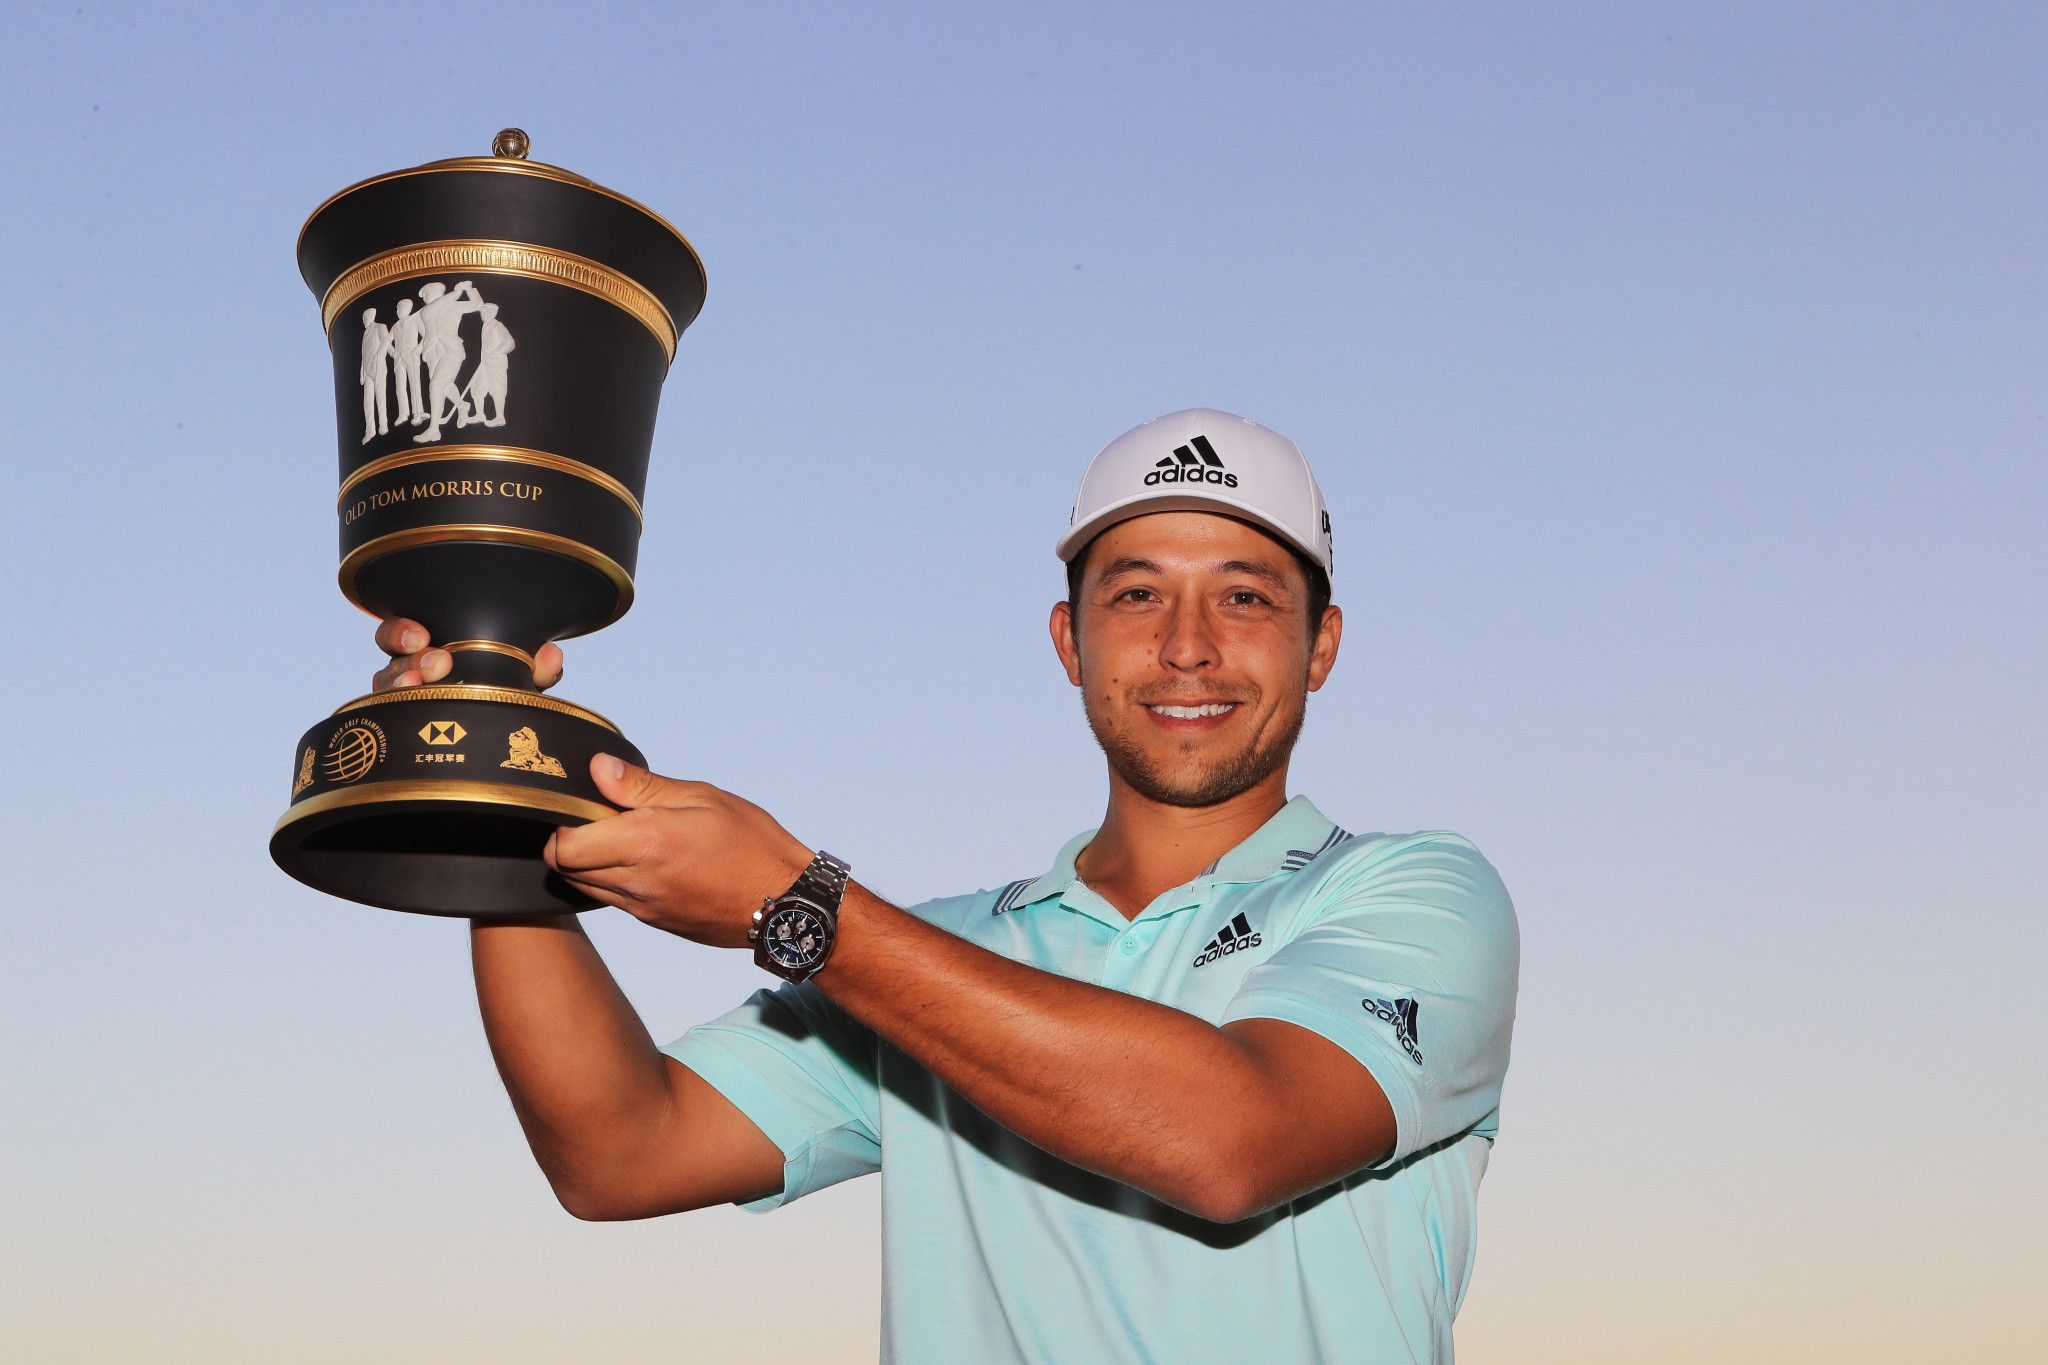 Schauffele wins play-off to triumph at World Golf Championships in Shanghai